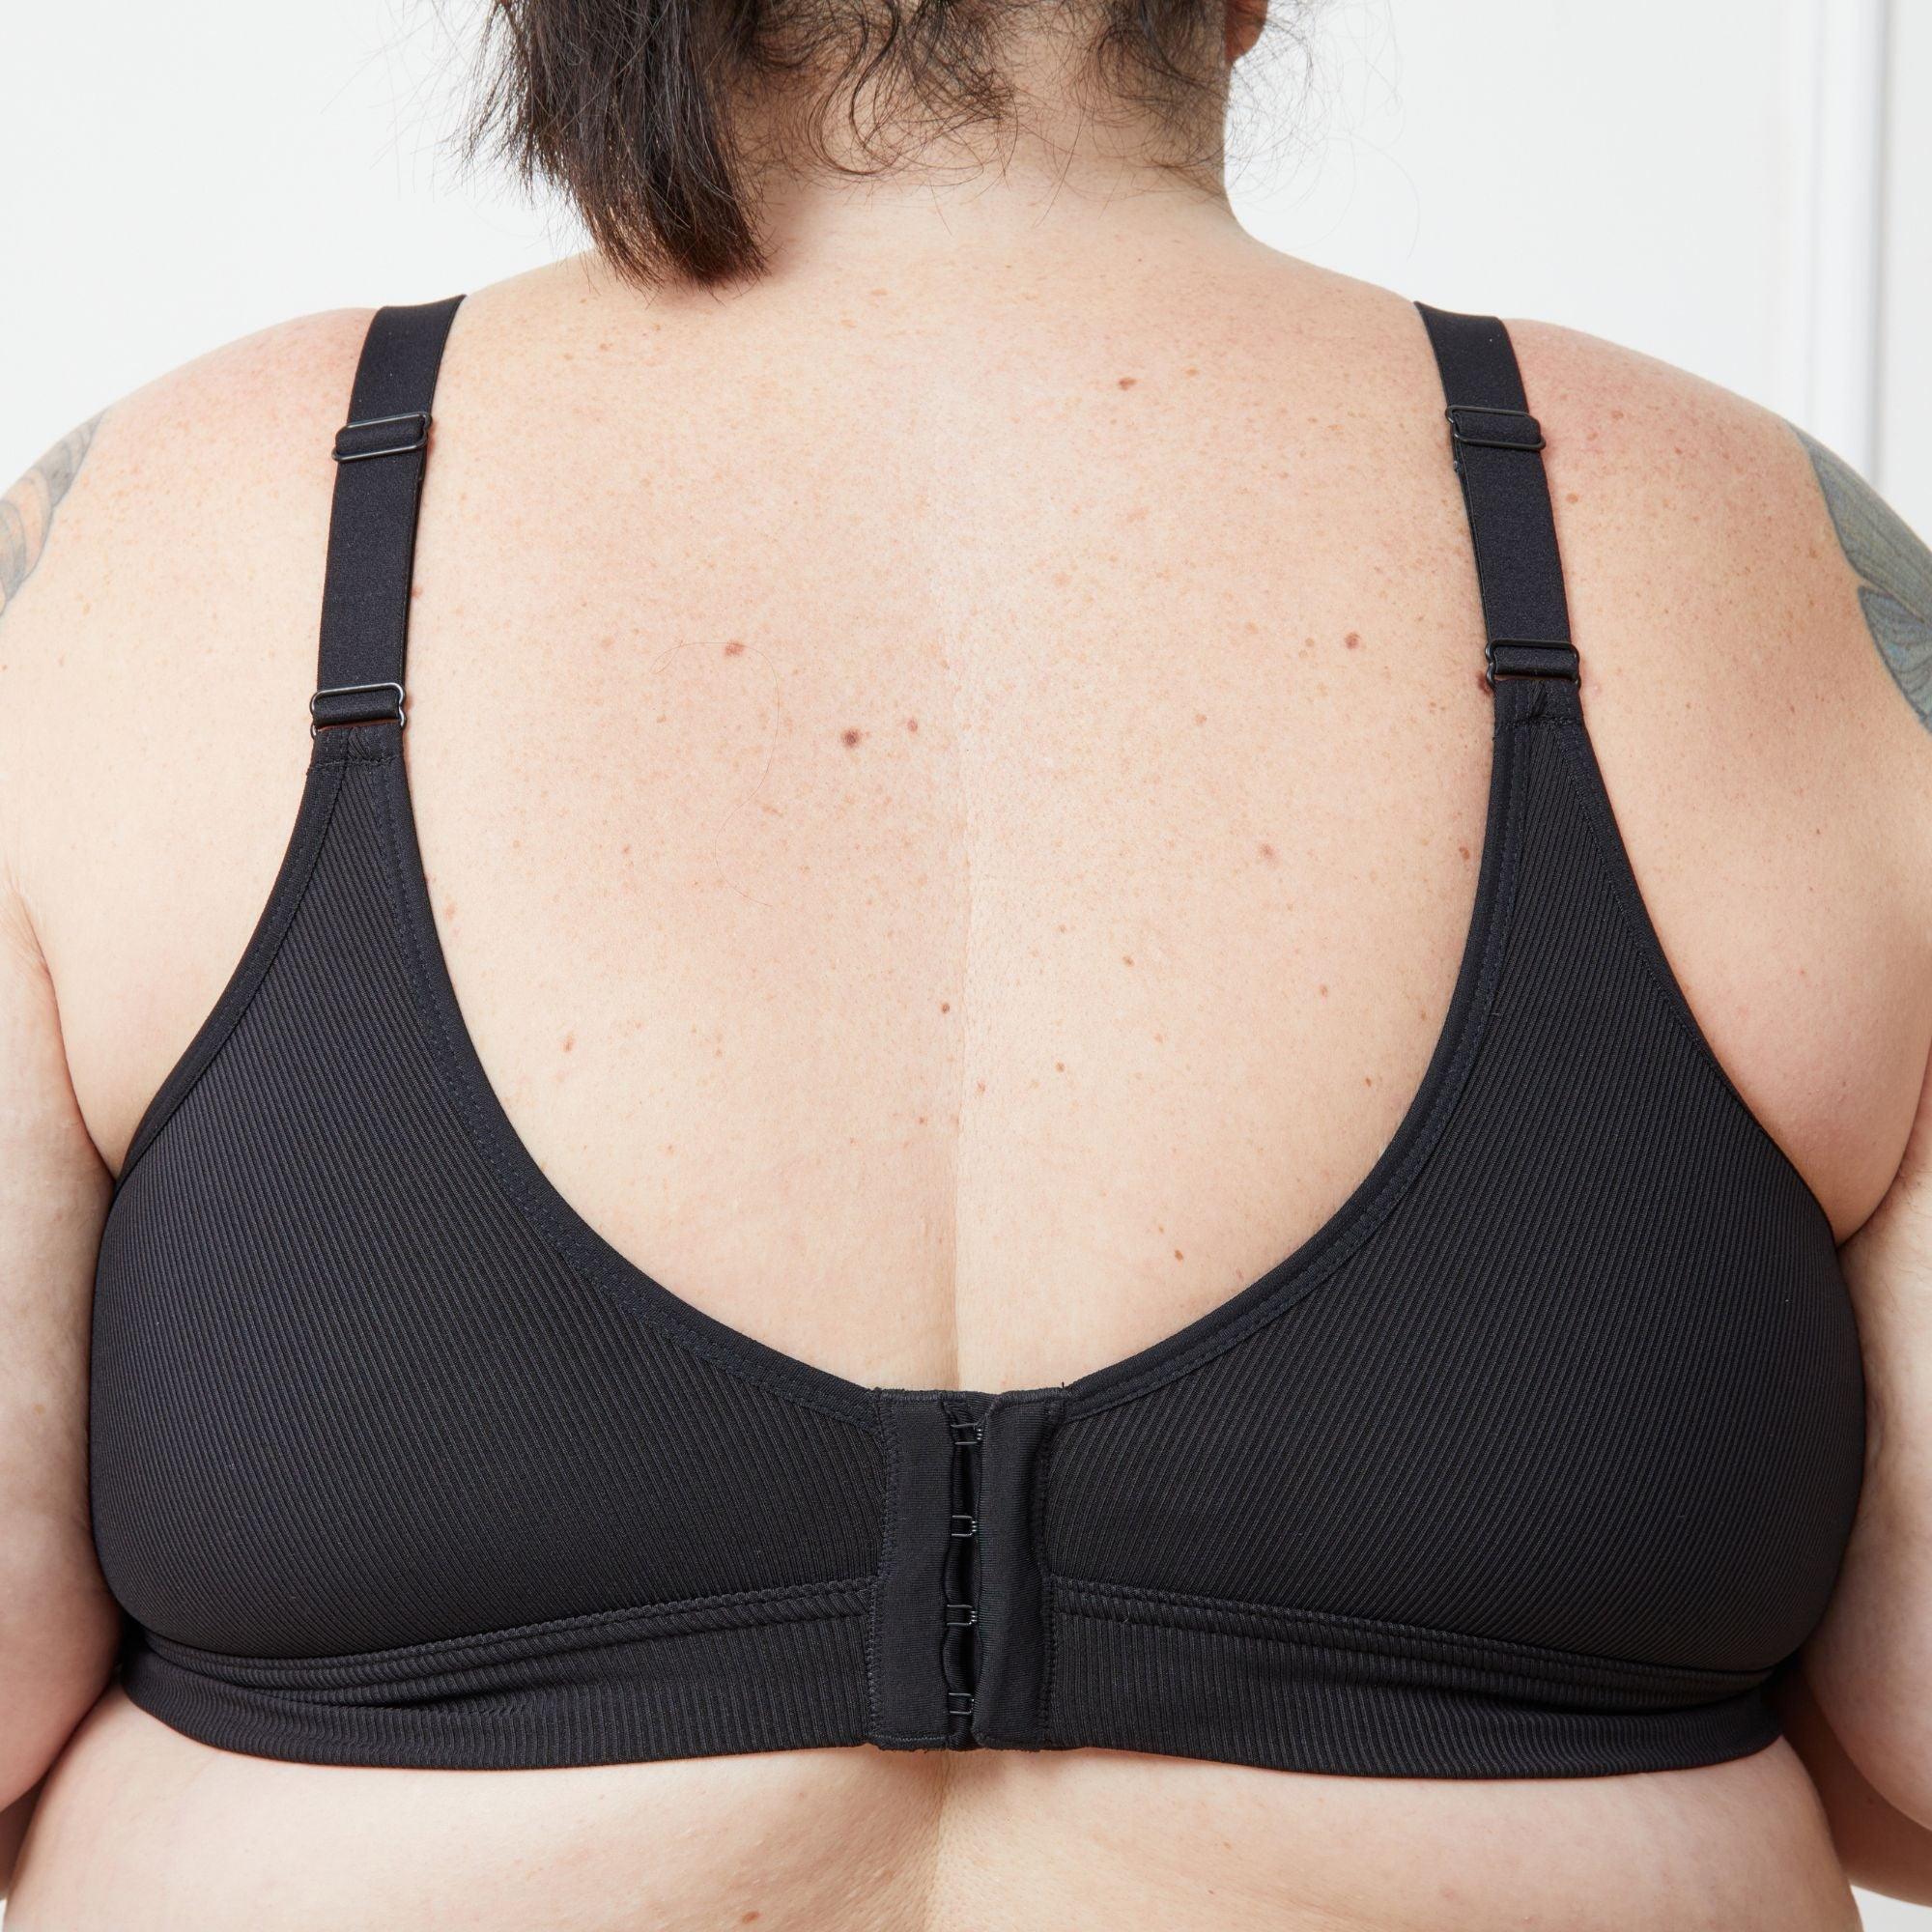 5 Minute Bra Tip: How to check you have the correct band size.